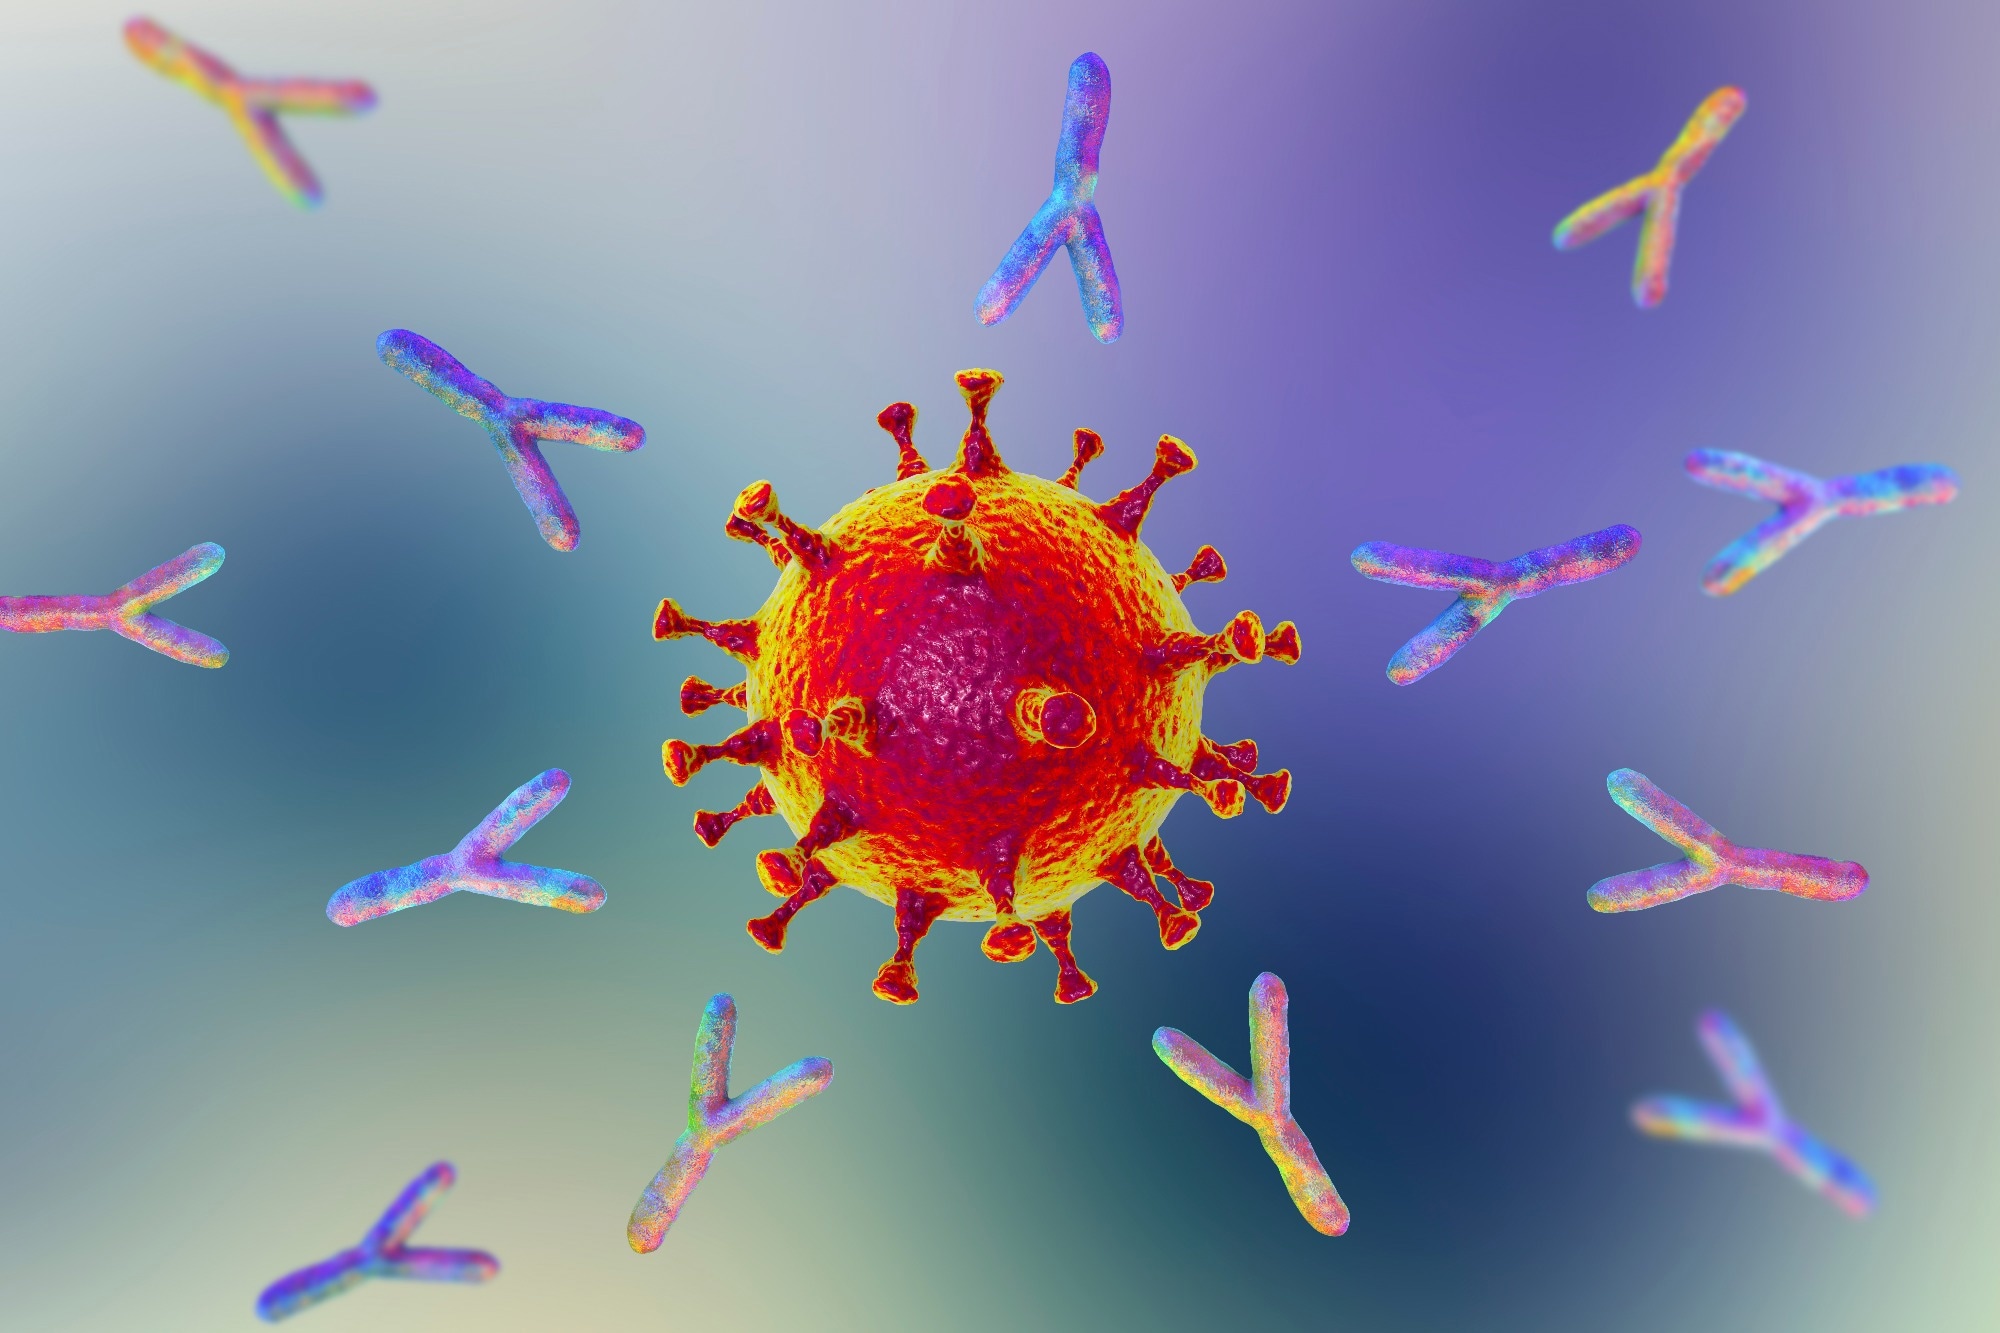 Study: Plasma proteomic signature predicts who will get persistent symptoms following SARS-CoV-2 infection. Image Credit: Kateryna Kon/Shutterstock